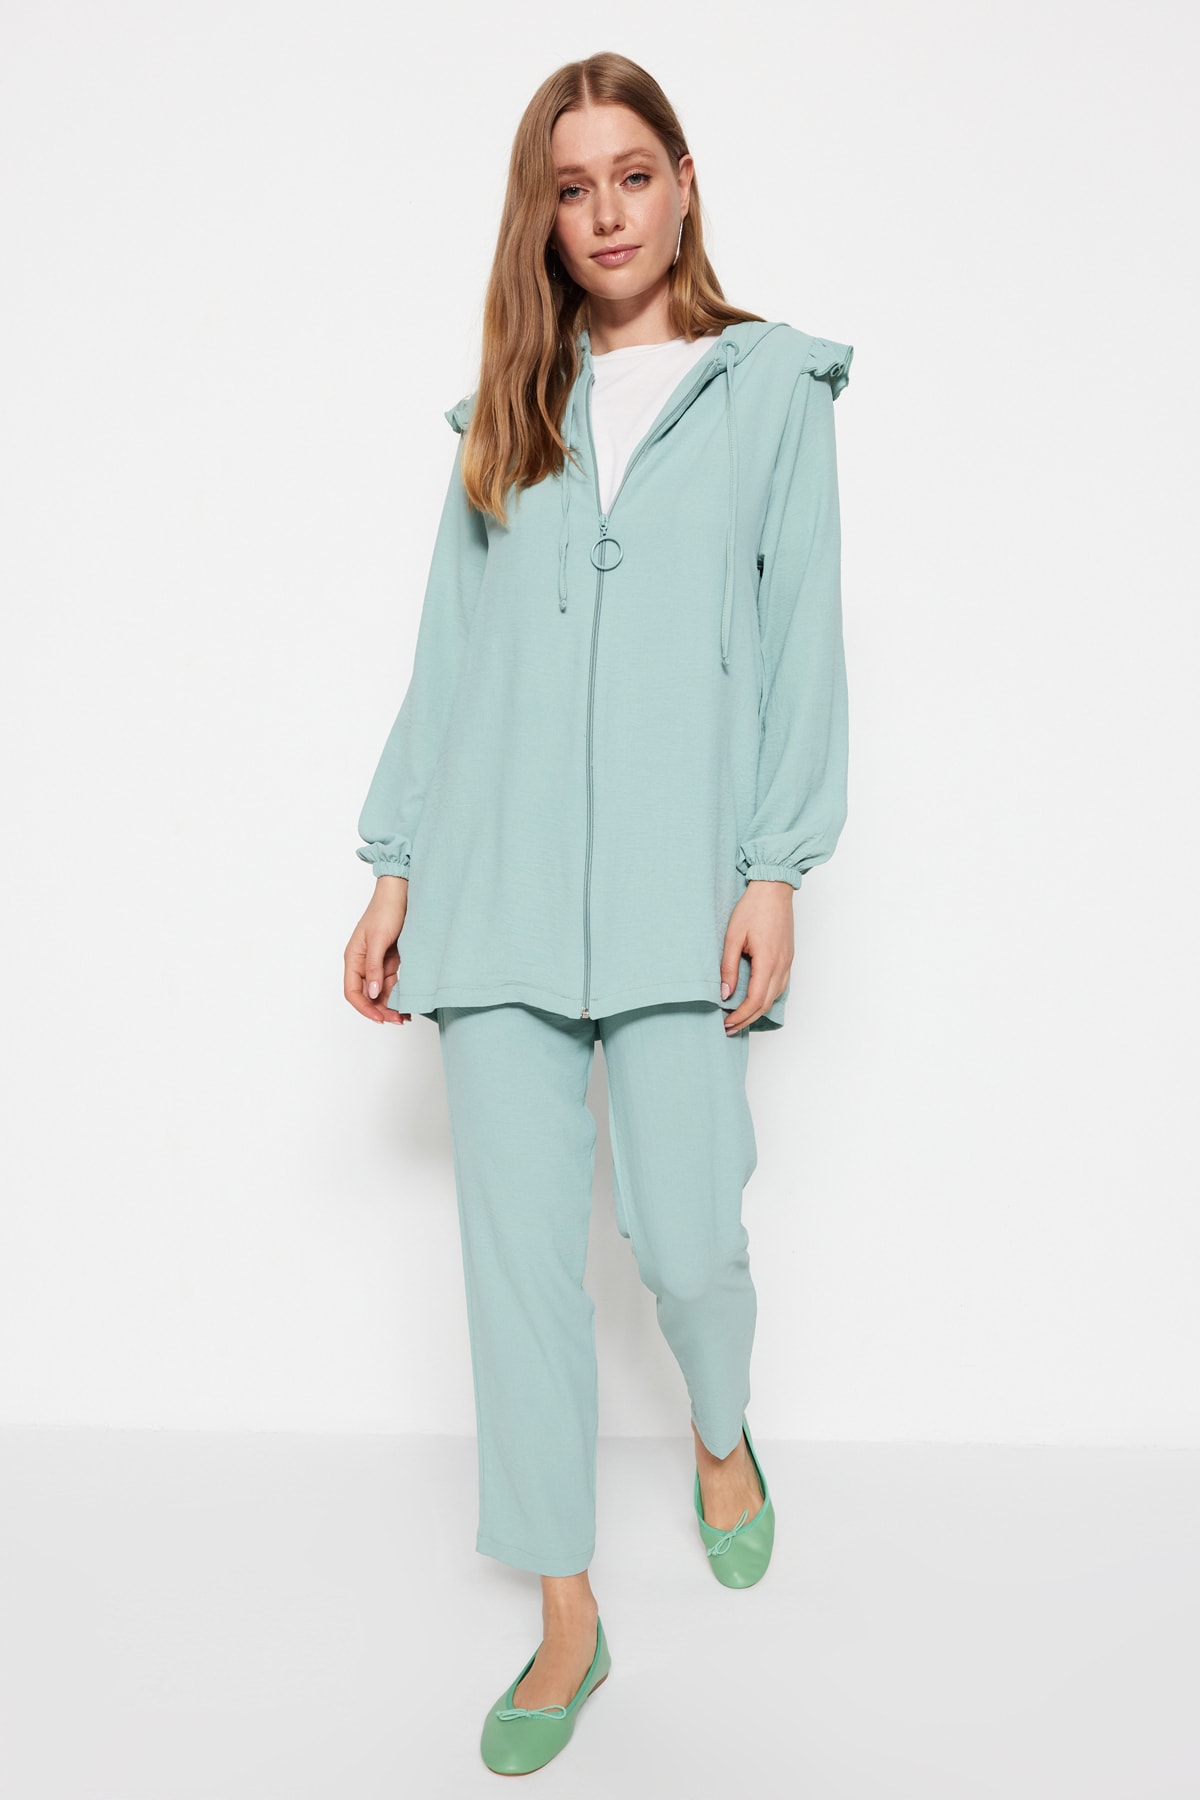 Trendyol Mint Shoulder Frilly Hooded Woven Aerobin Tunic-Pants Suit